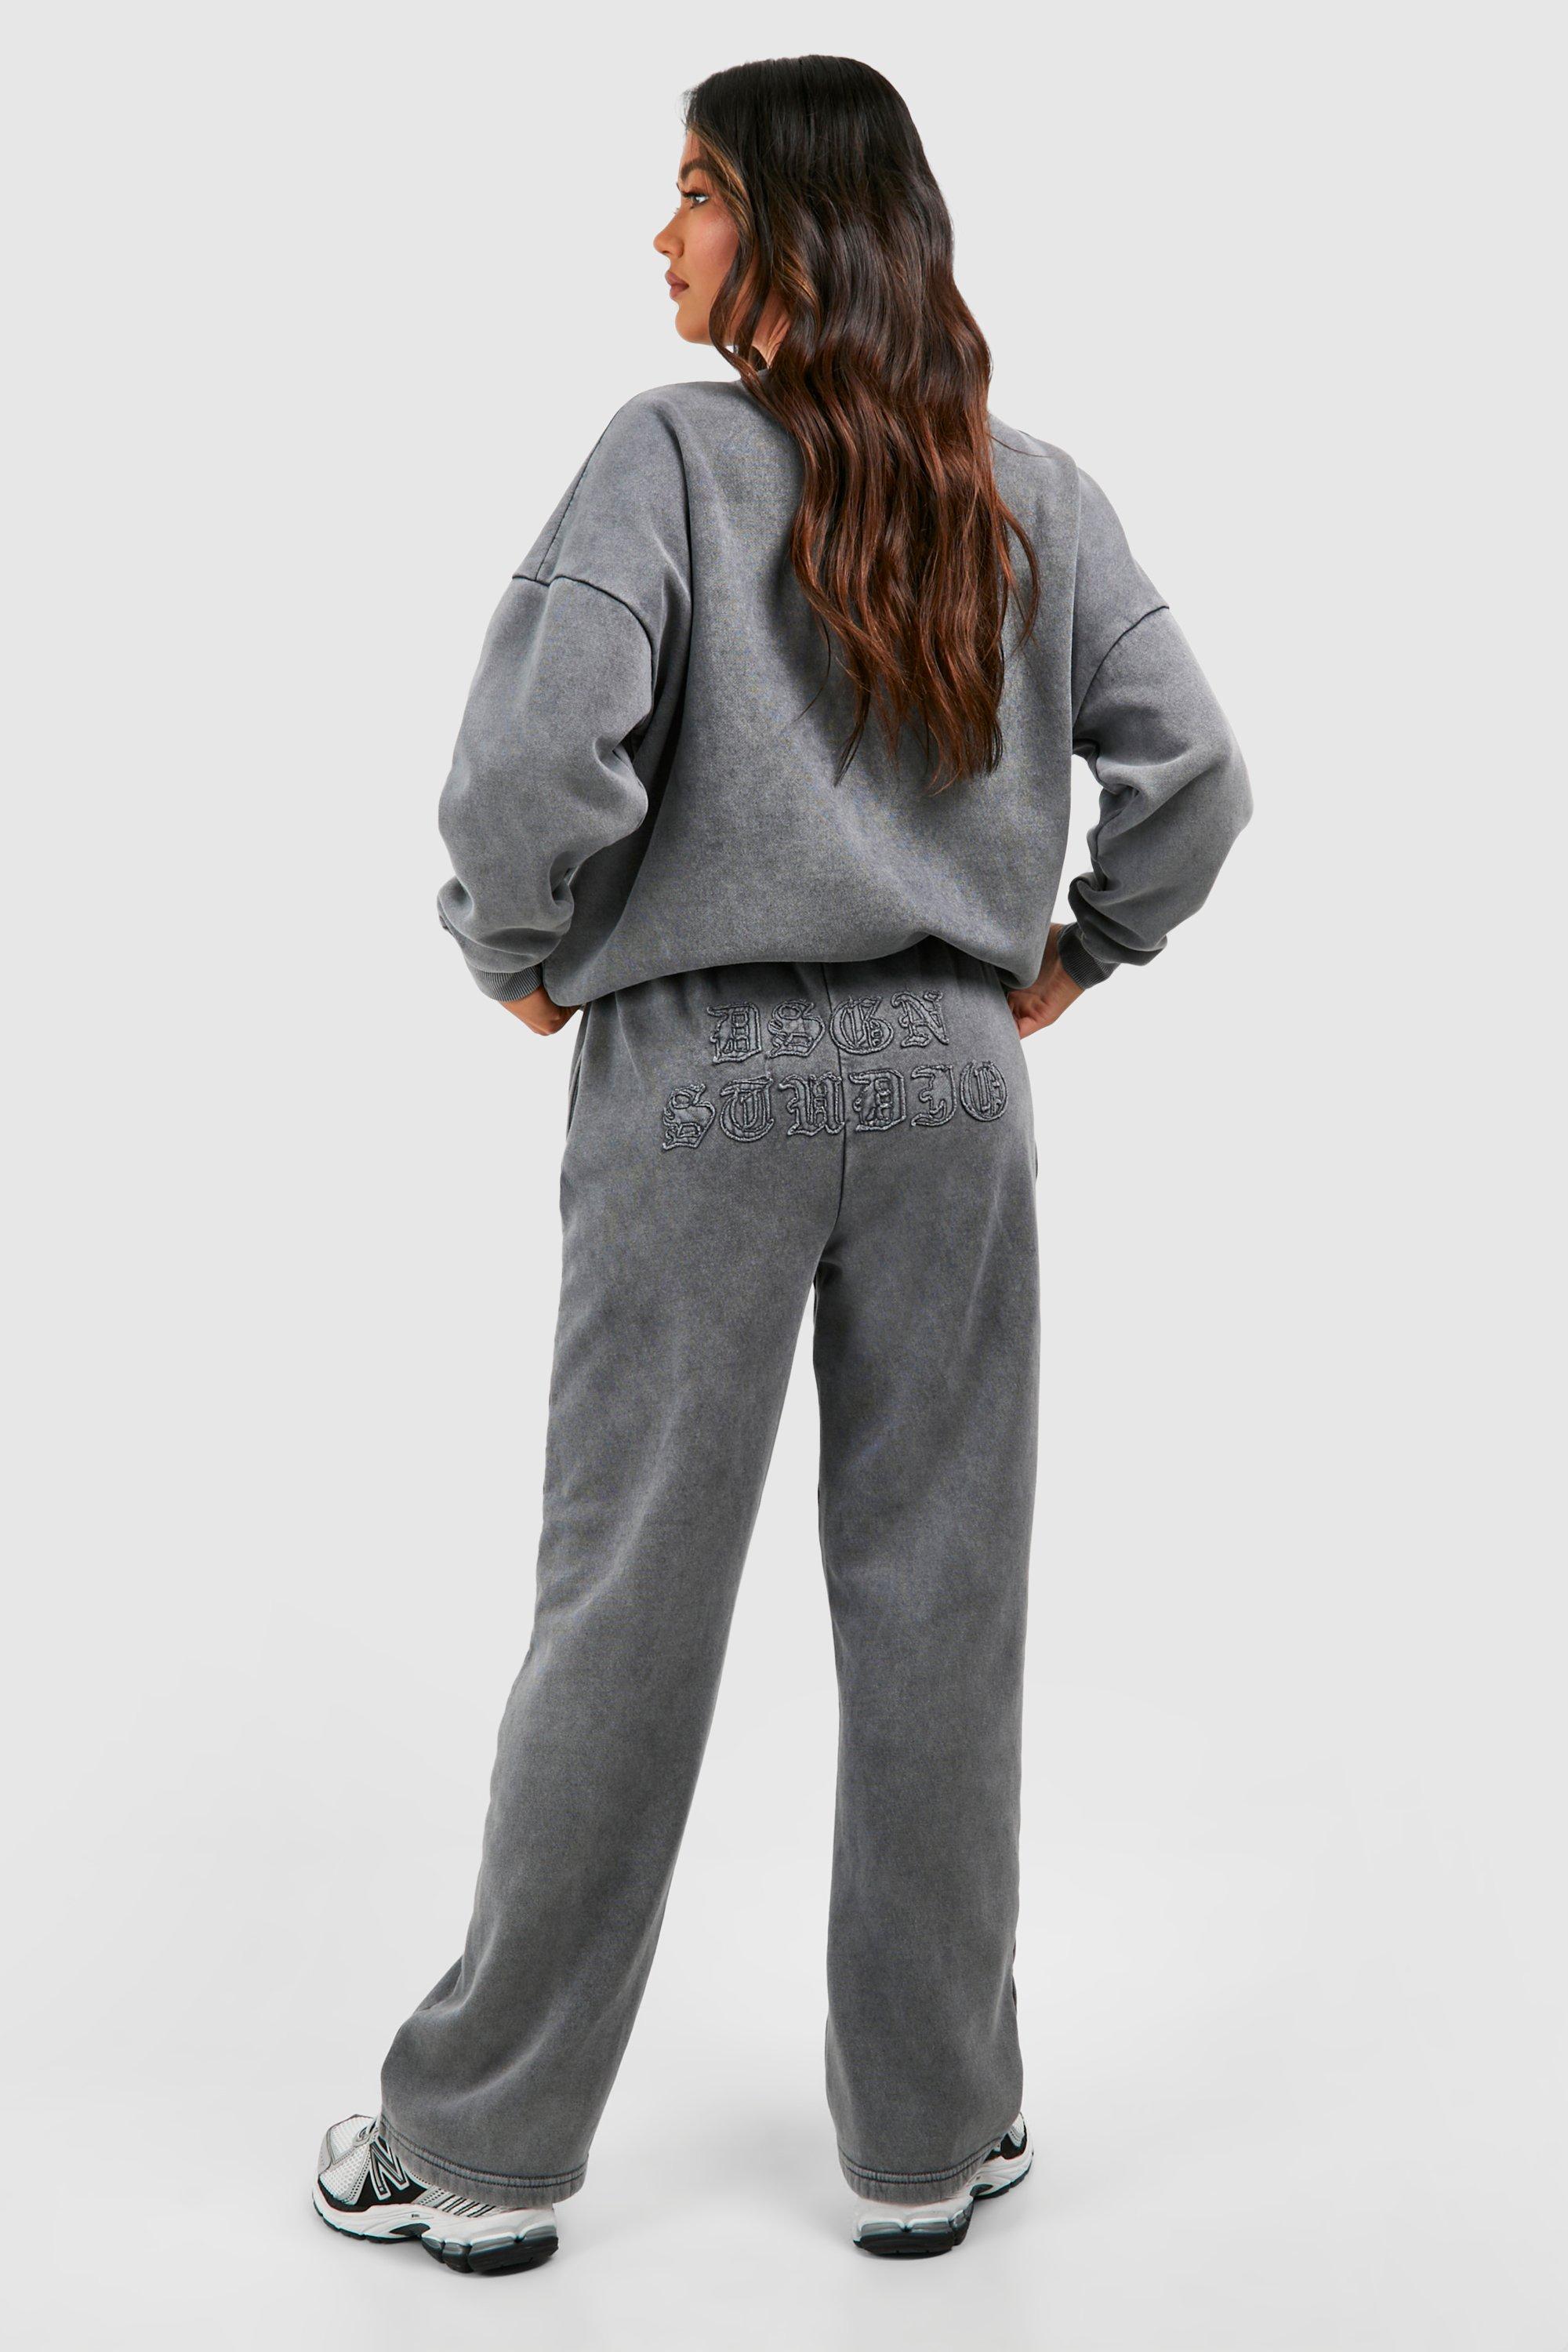 Women's Microfiber Fabric Straight Fit Trackpants with Stay Dry Treatment -  Sky Captain